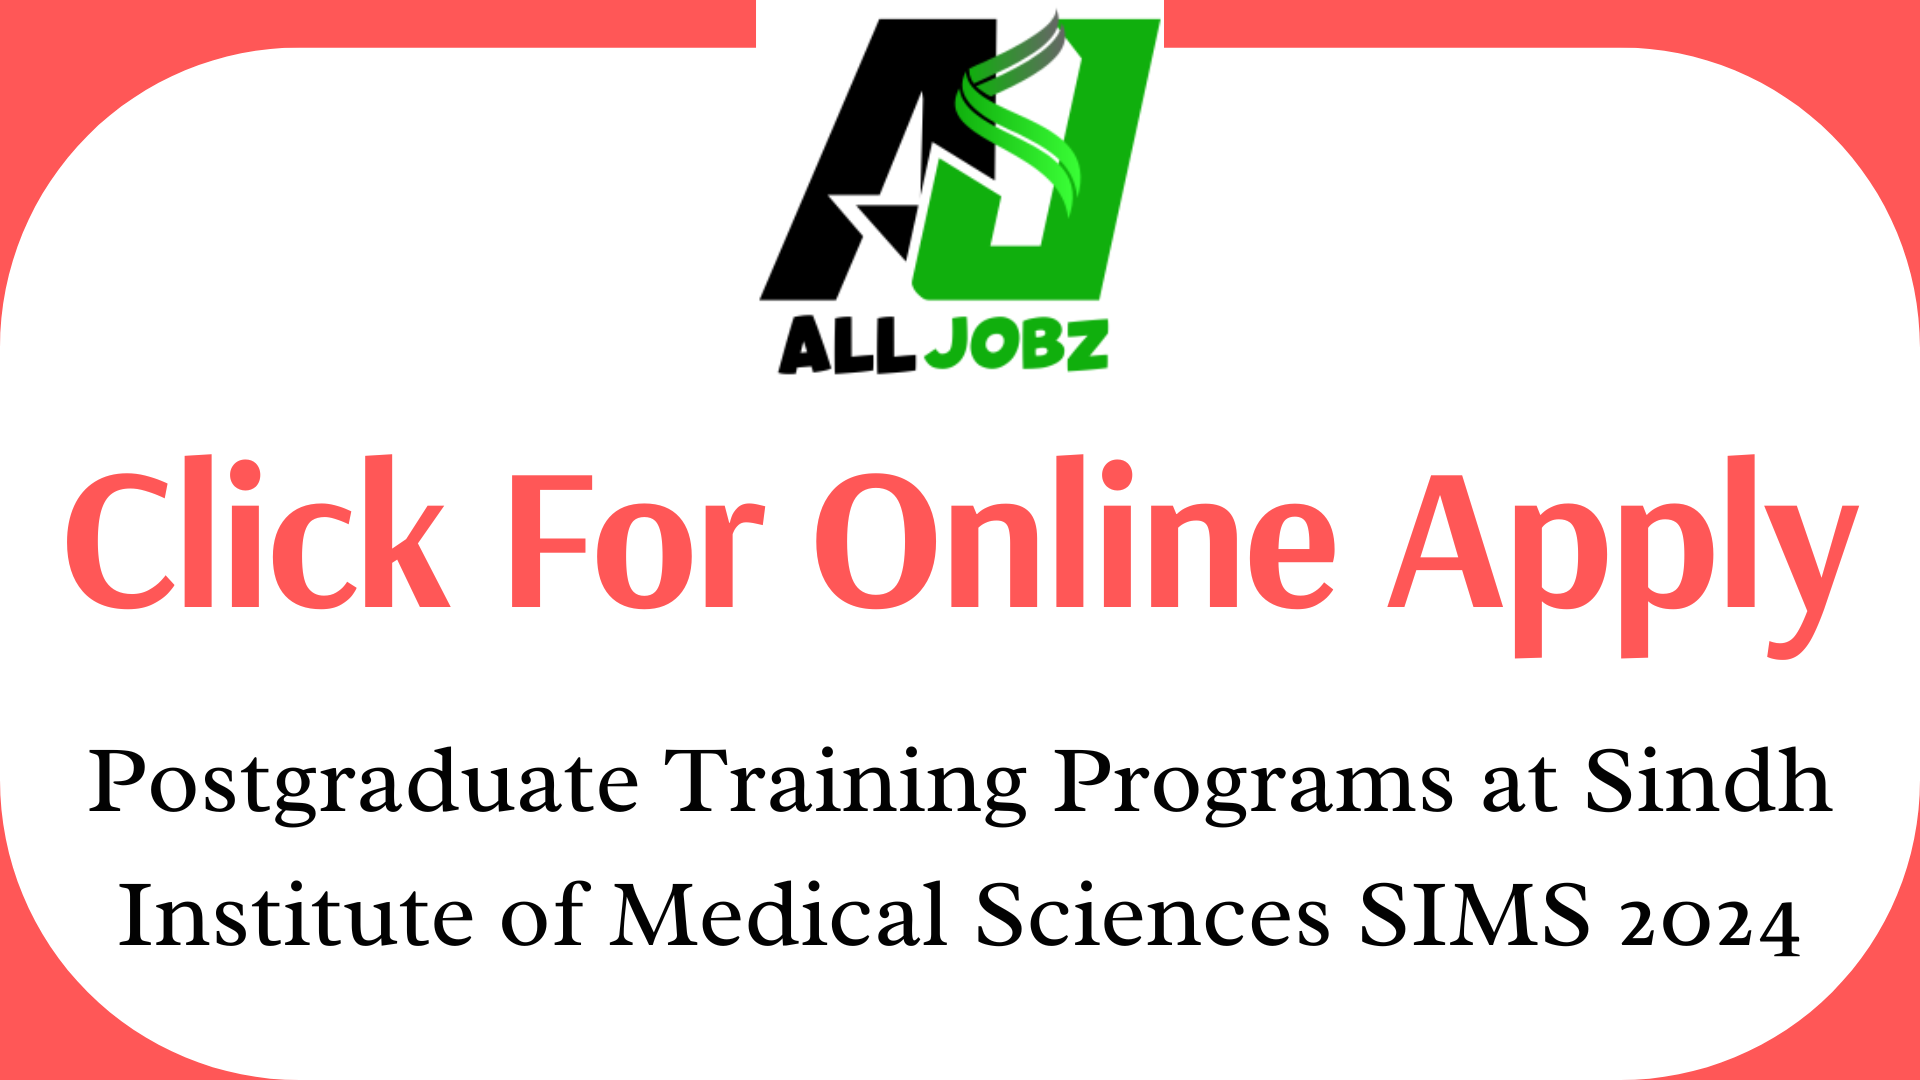 Postgraduate Training Programs At Sindh Institute Of Medical Sciences Sims 2024, Online Postgraduate Training Programs At Sindh Institute Of Medical Sciences Sims, Www.siut.org Admission 2024, Sims Siut Edu Pk Admission, Siut Diploma Courses, Www.siut.org Admission 2024 Last Date, Sims Siut Result, Www.siut.org Admission 2024 Test Date, Www.siut.org Admission 2024 Result